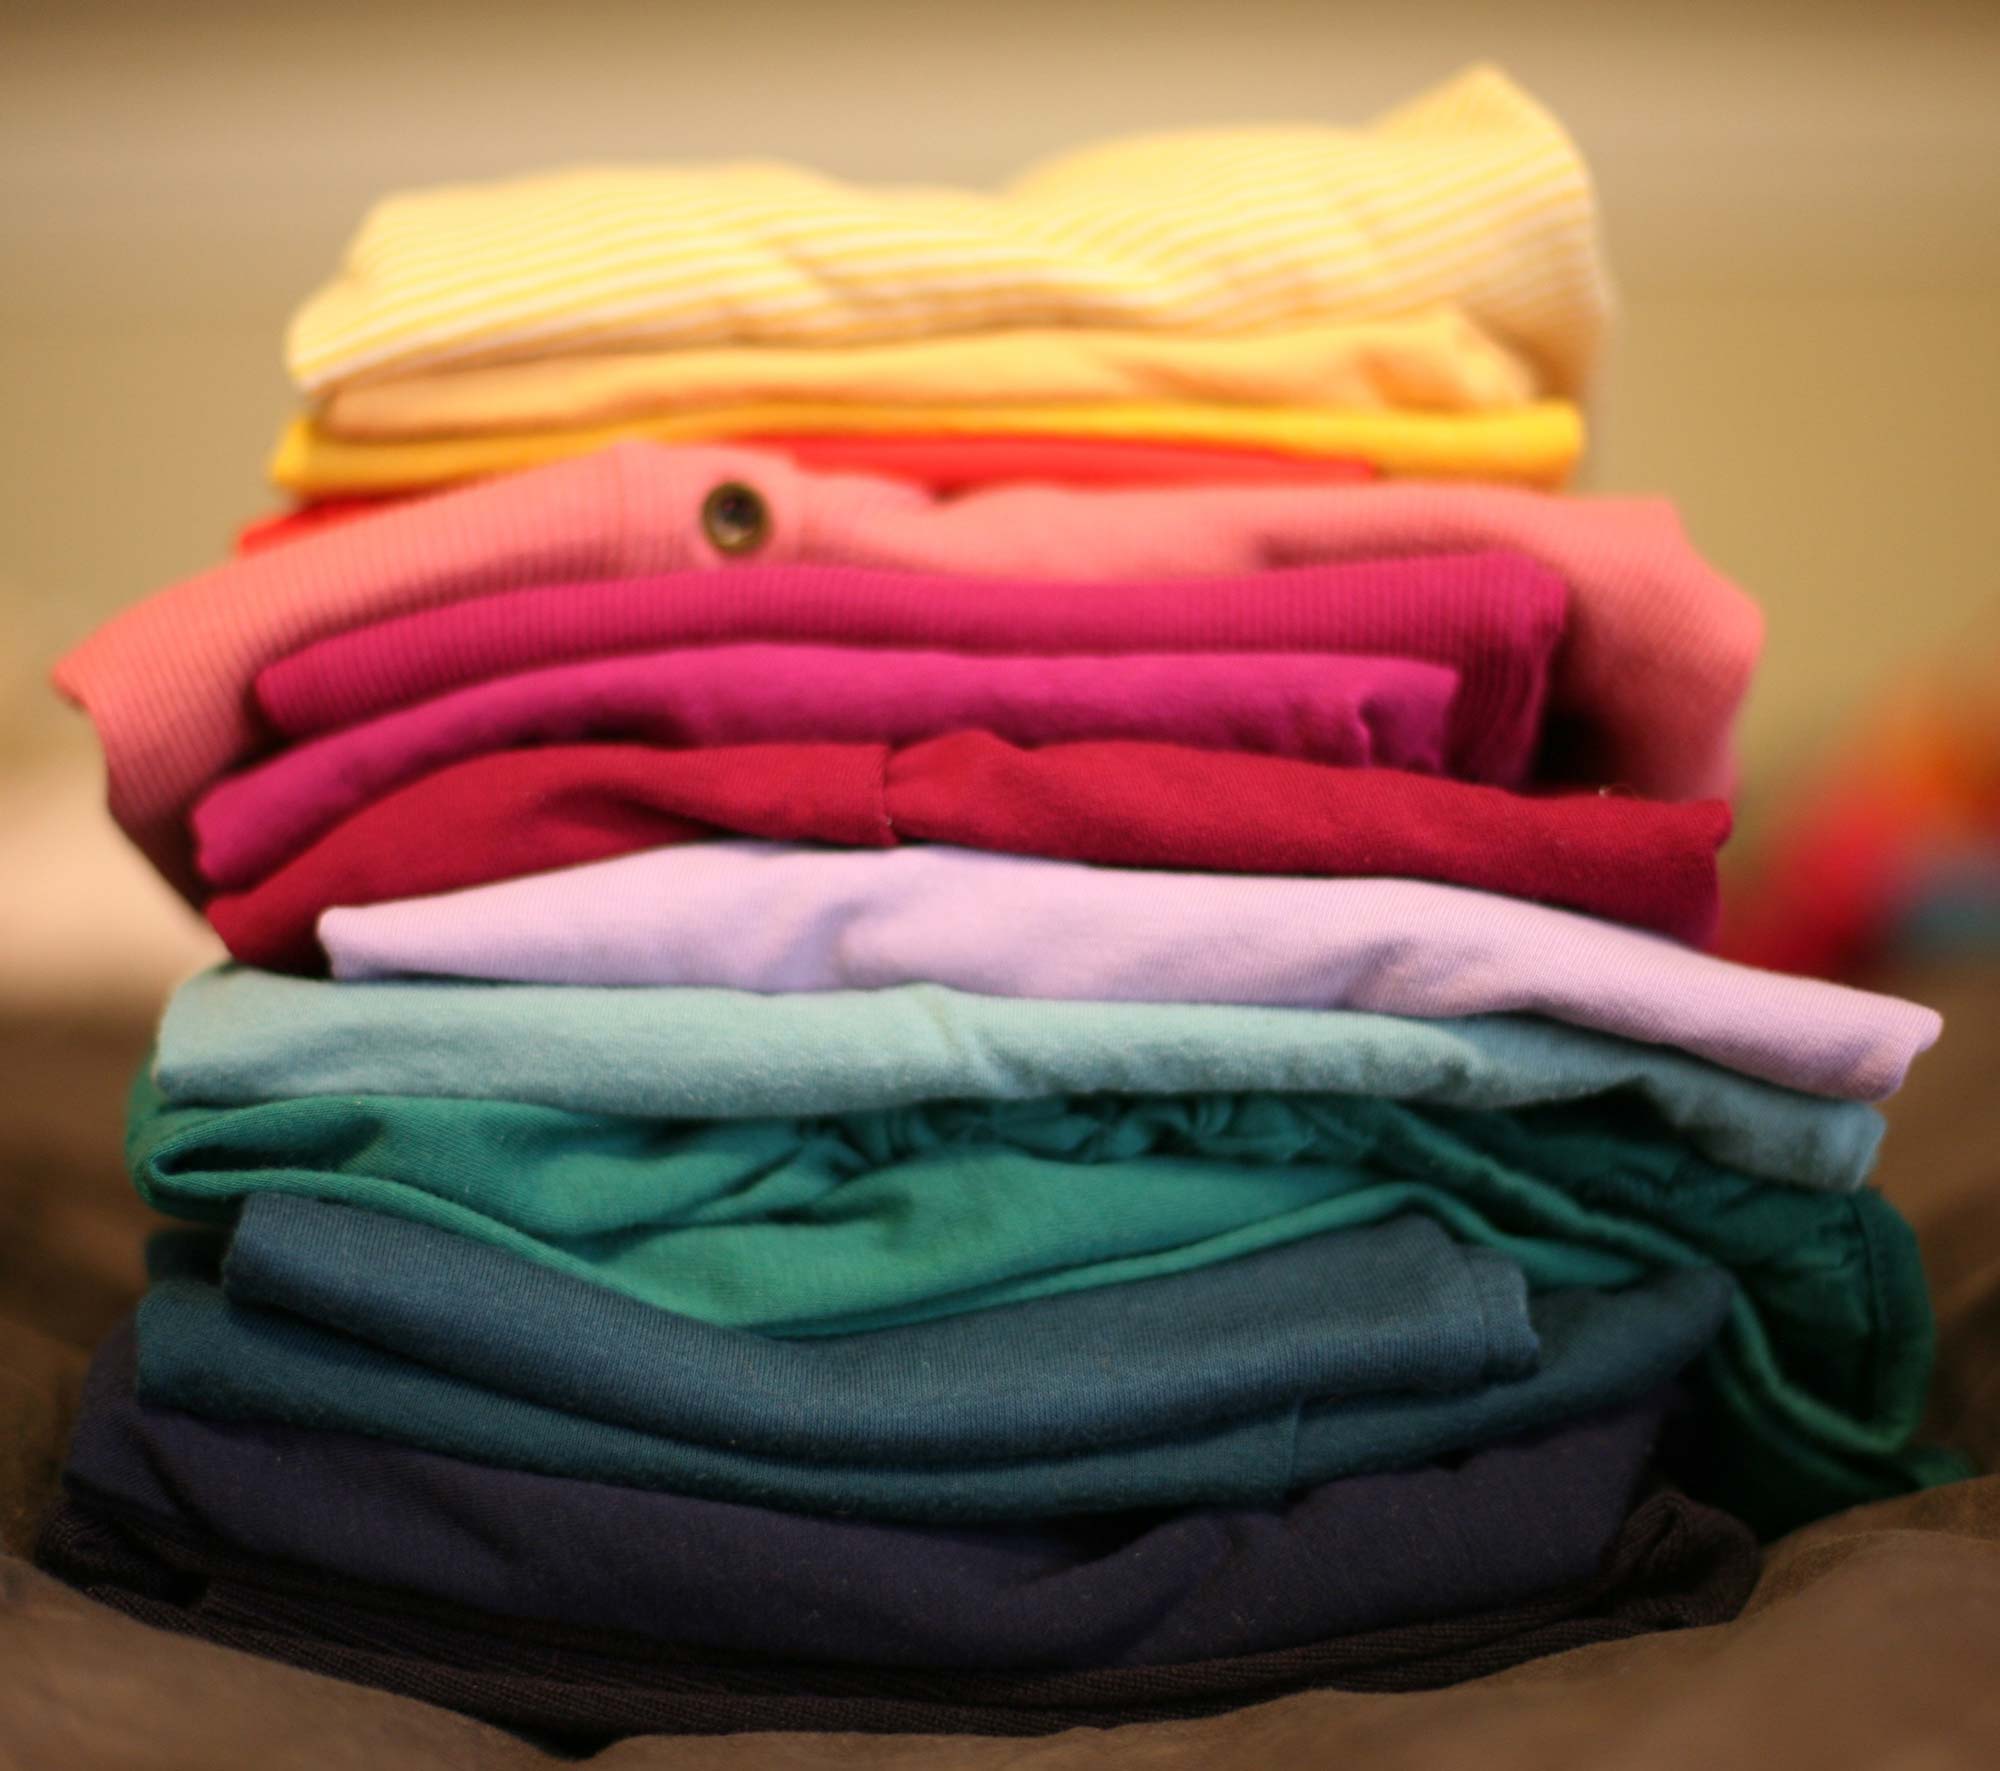 Wash Dry and Fold service is offered at our dry cleaning shops.